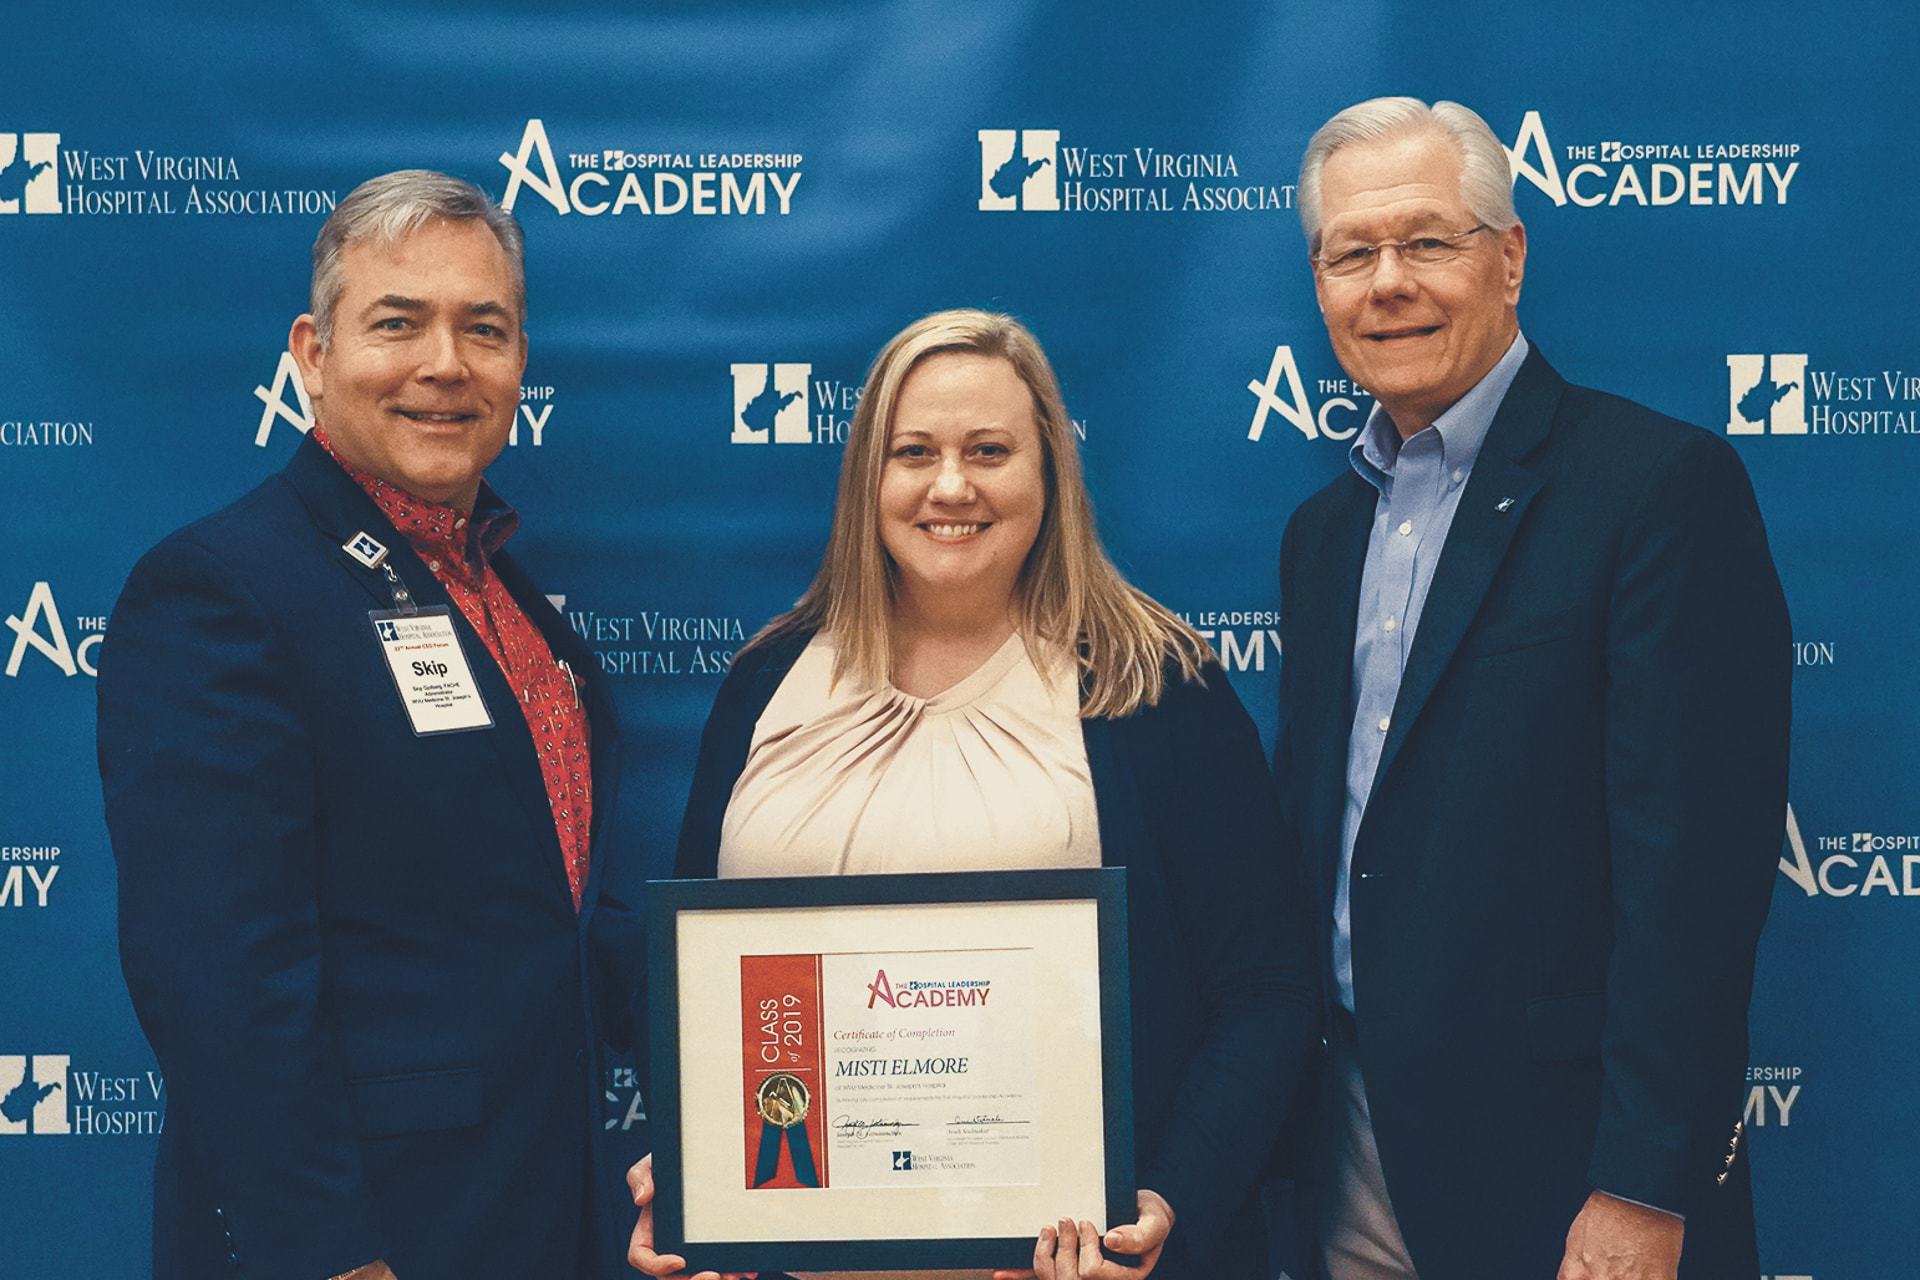 Skip Gjolberg, President of St. Joseph’s Hospital (left) and Joseph Letnaunchyn, President and CEO of the WVHA Association (right), present Misti Elmore with her Certification of Completion.